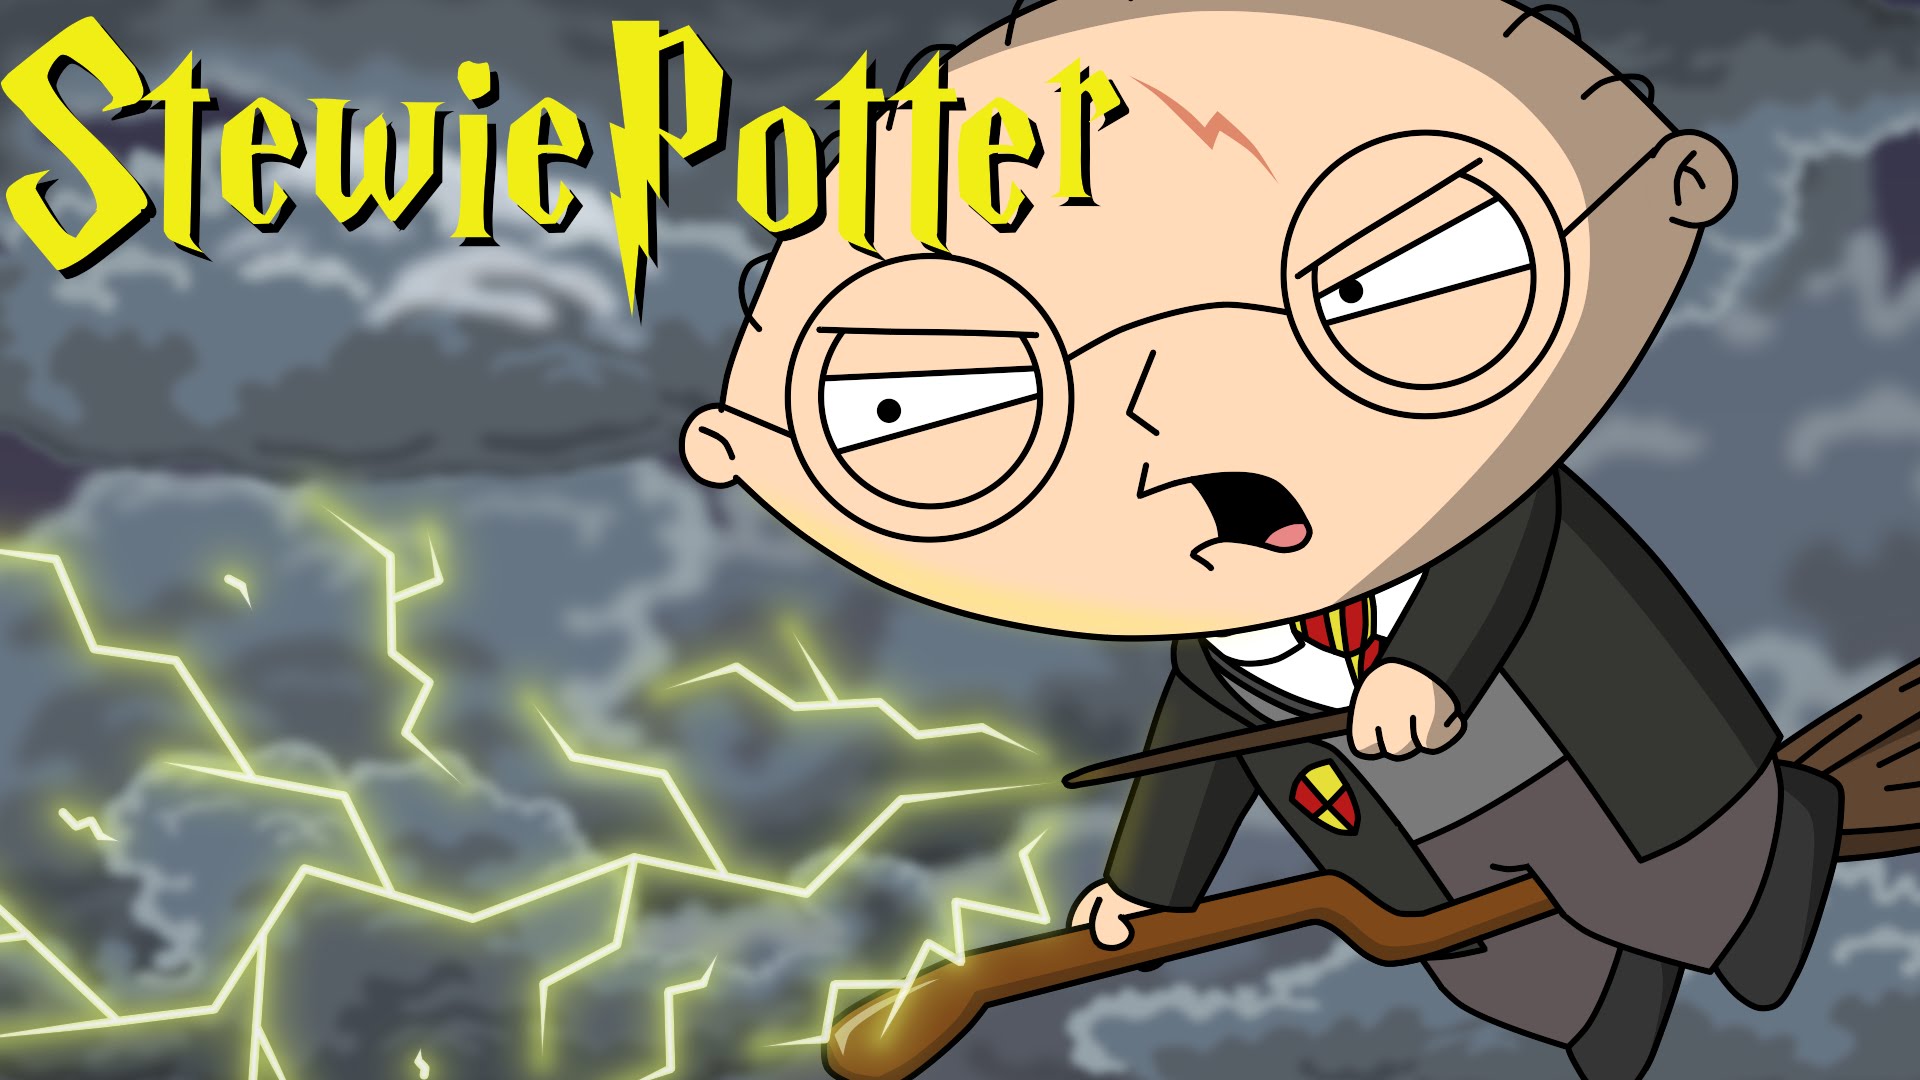 Stewie Potter A Magical Animated Parody Of Family Guy And Harry Potter